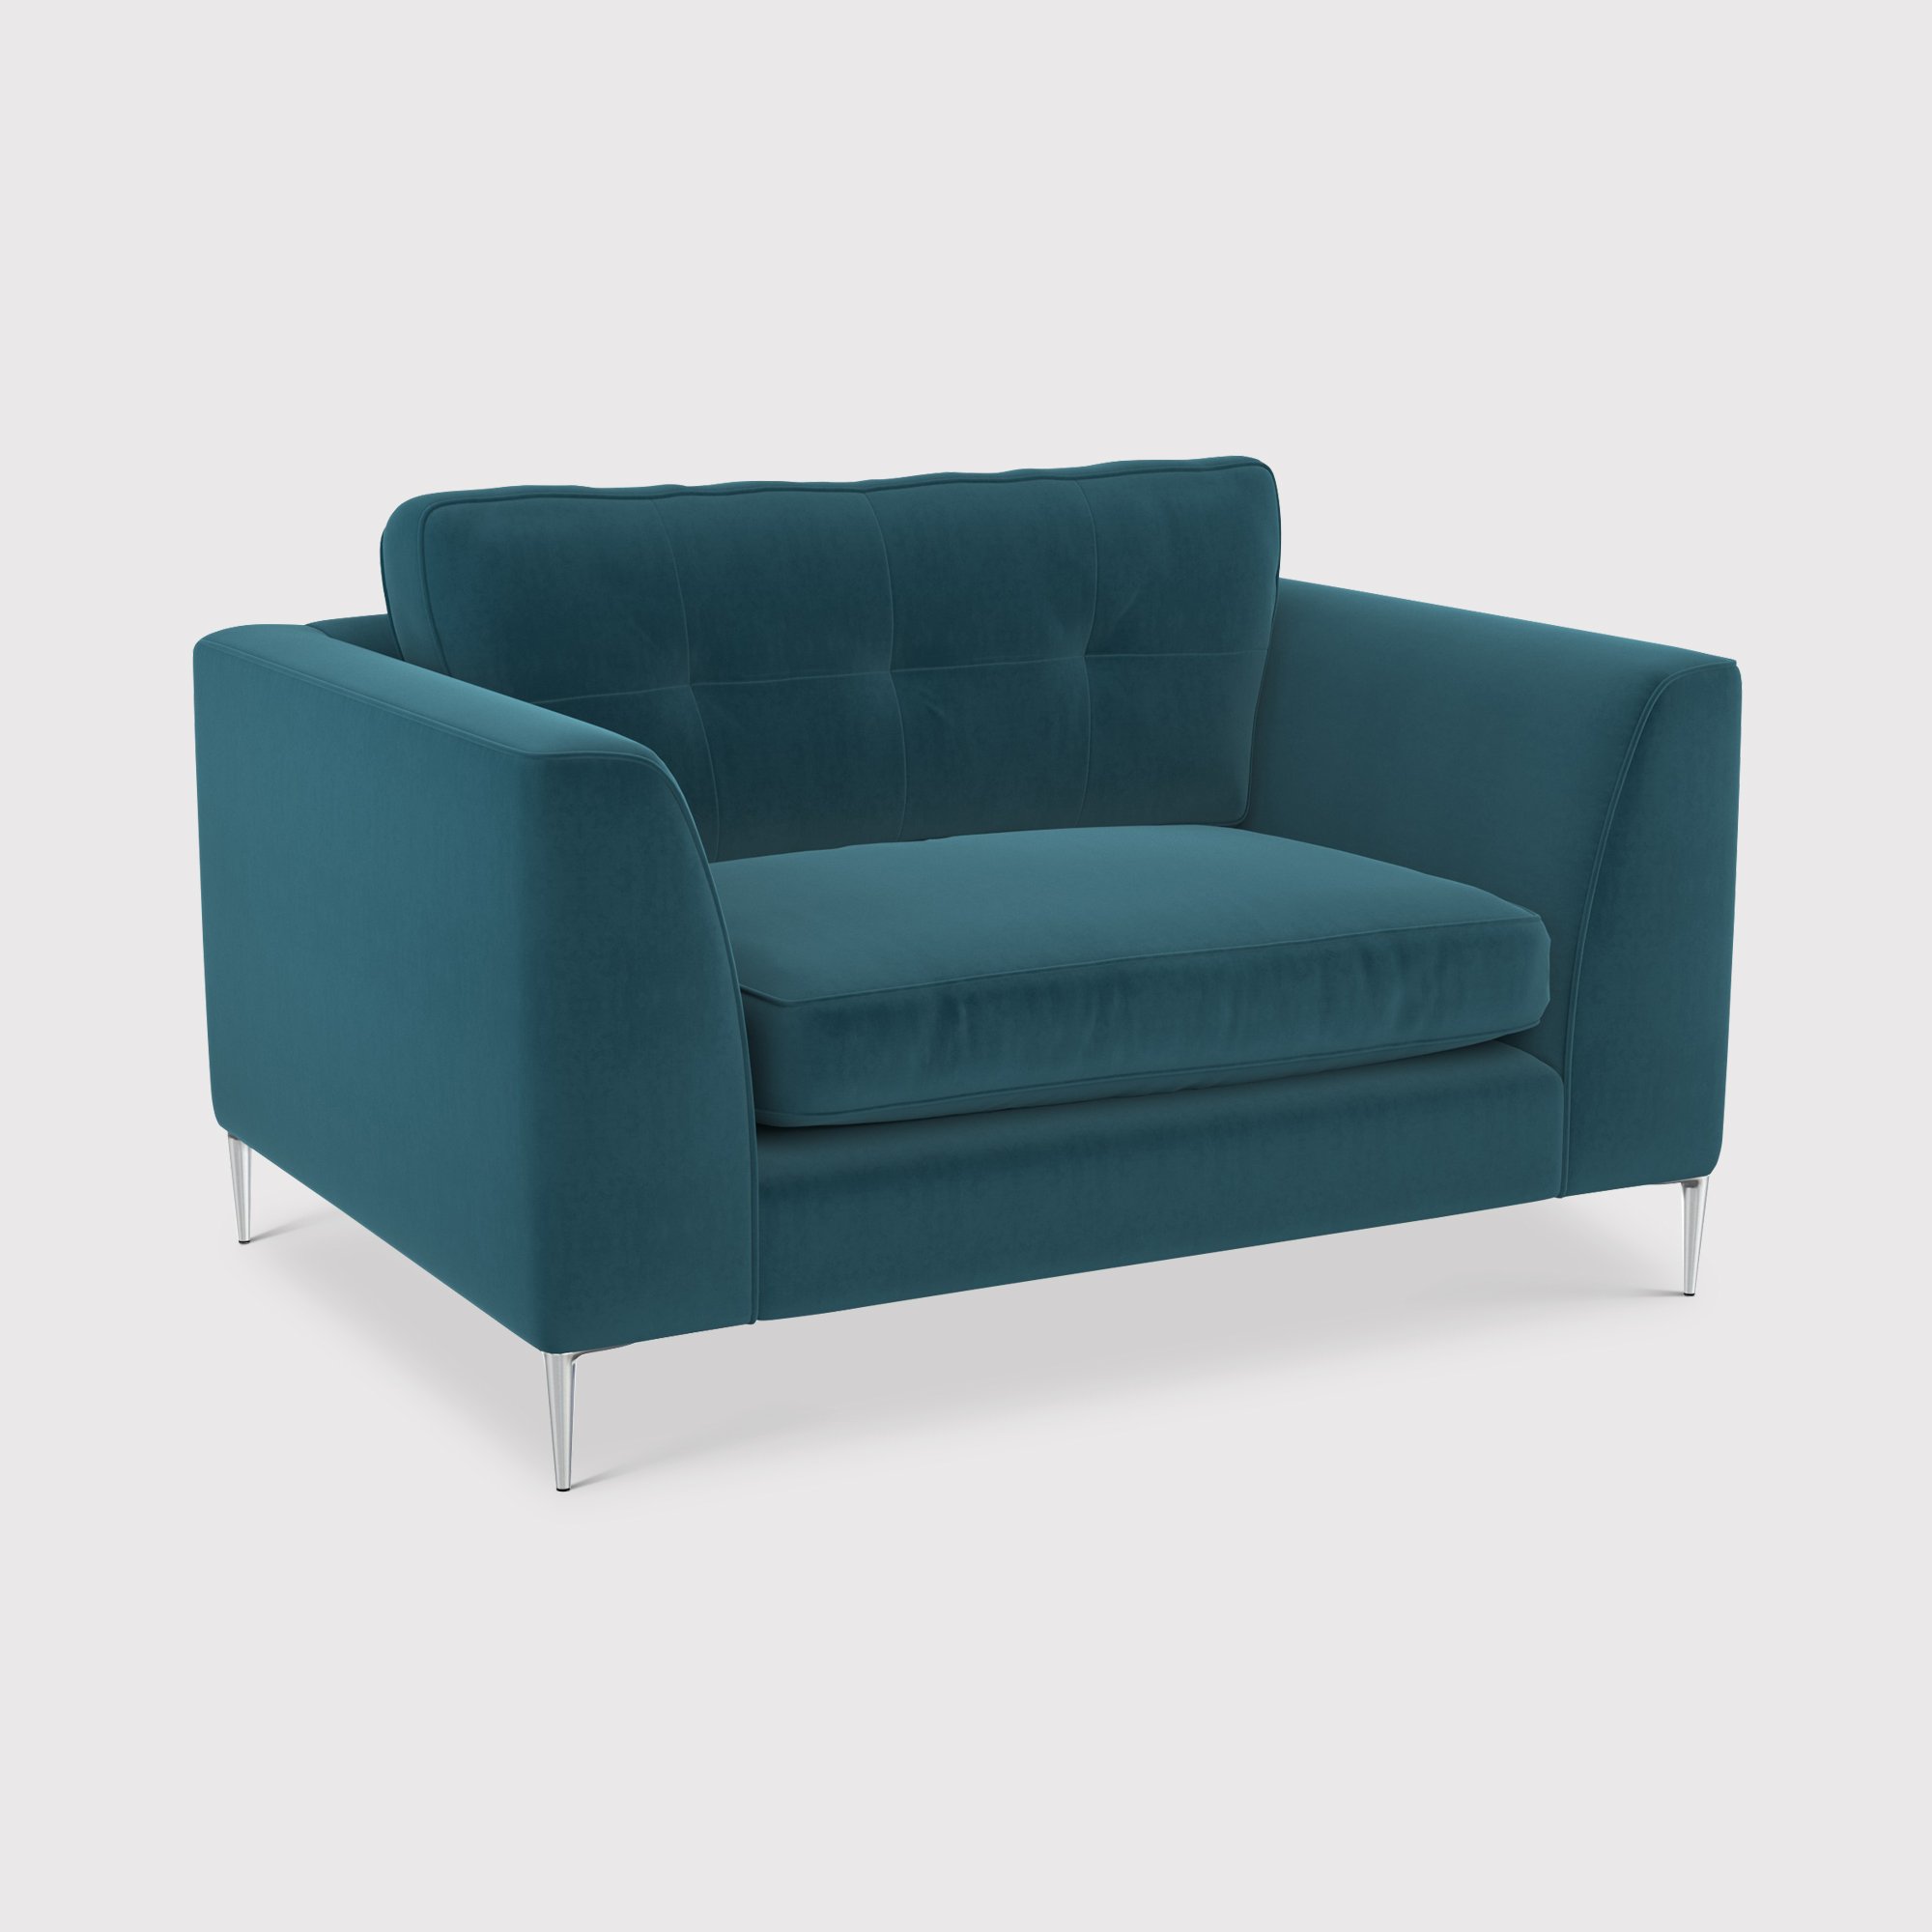 Conza Snuggler, Teal Fabric | Barker & Stonehouse